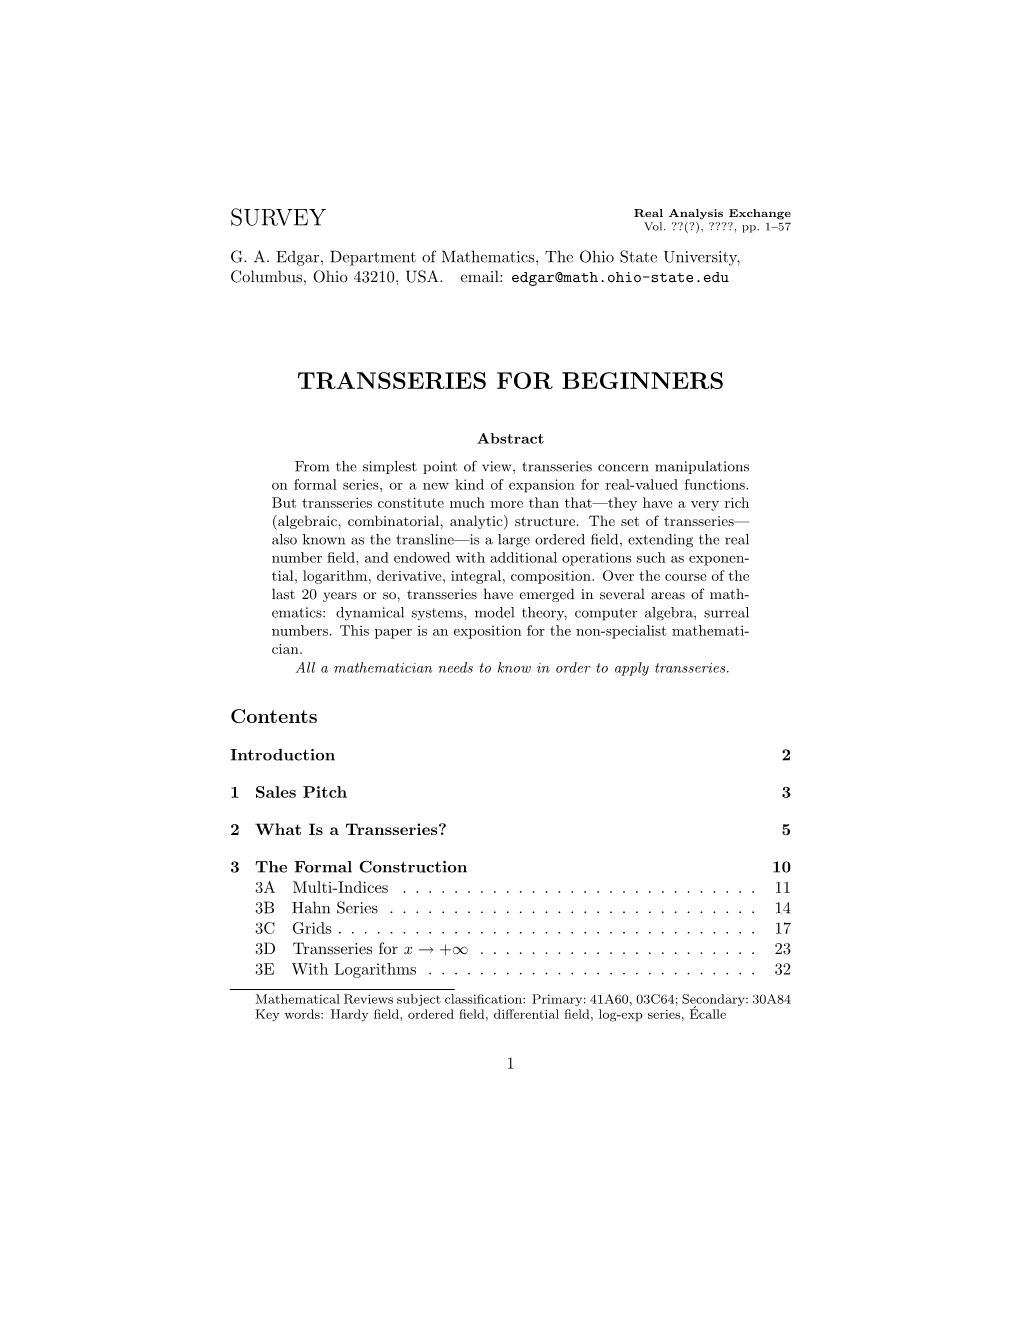 Survey Transseries for Beginners